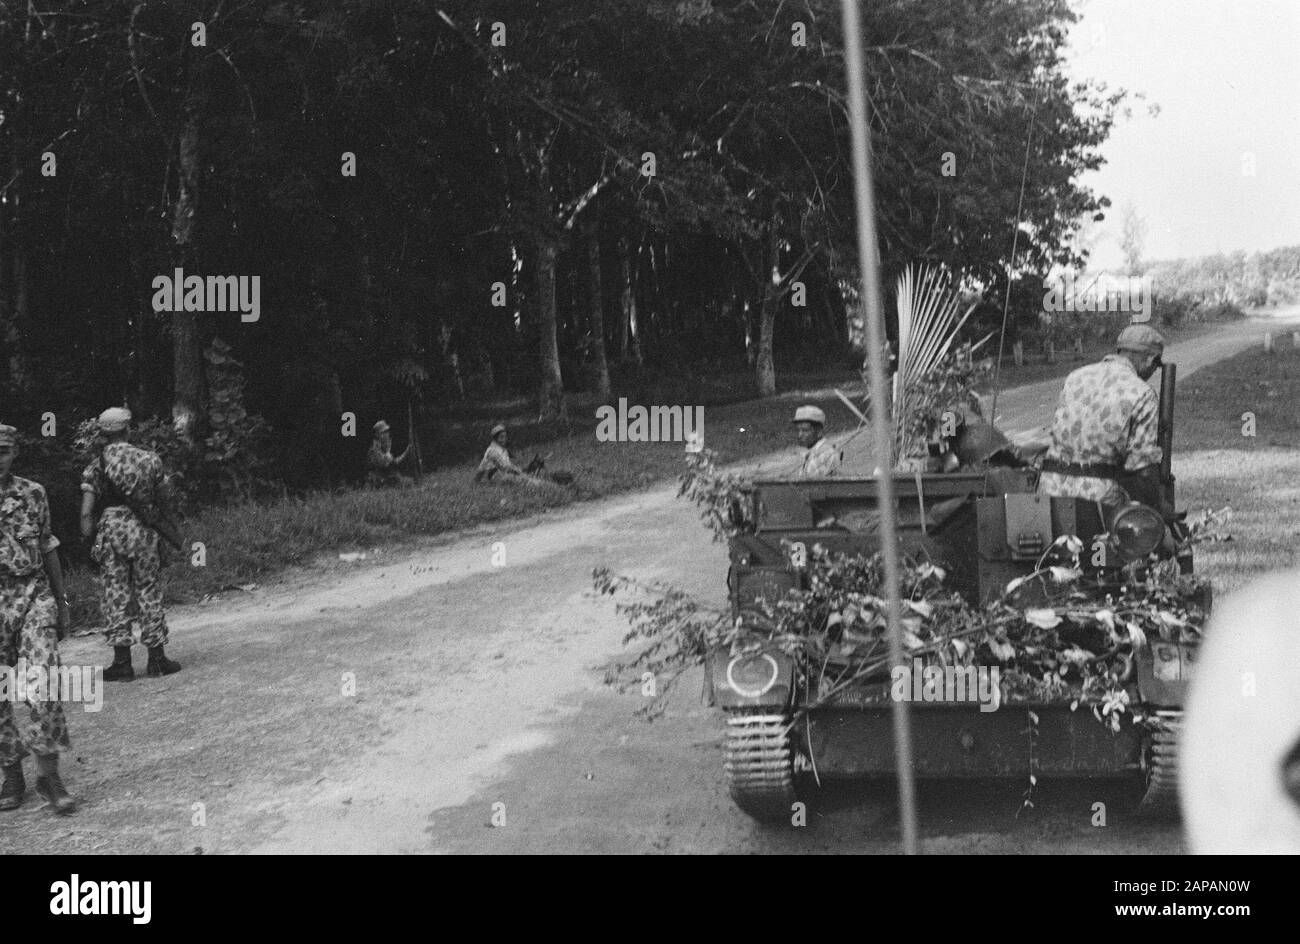 Loeboek Pakem en Baoengan Description: Collection Photo Collection Service for Army Contacts Indonesia, photon number 7551 Date: 29 July 1948 Location: Indonesia, Dutch East Indies, Sumatra Stock Photo